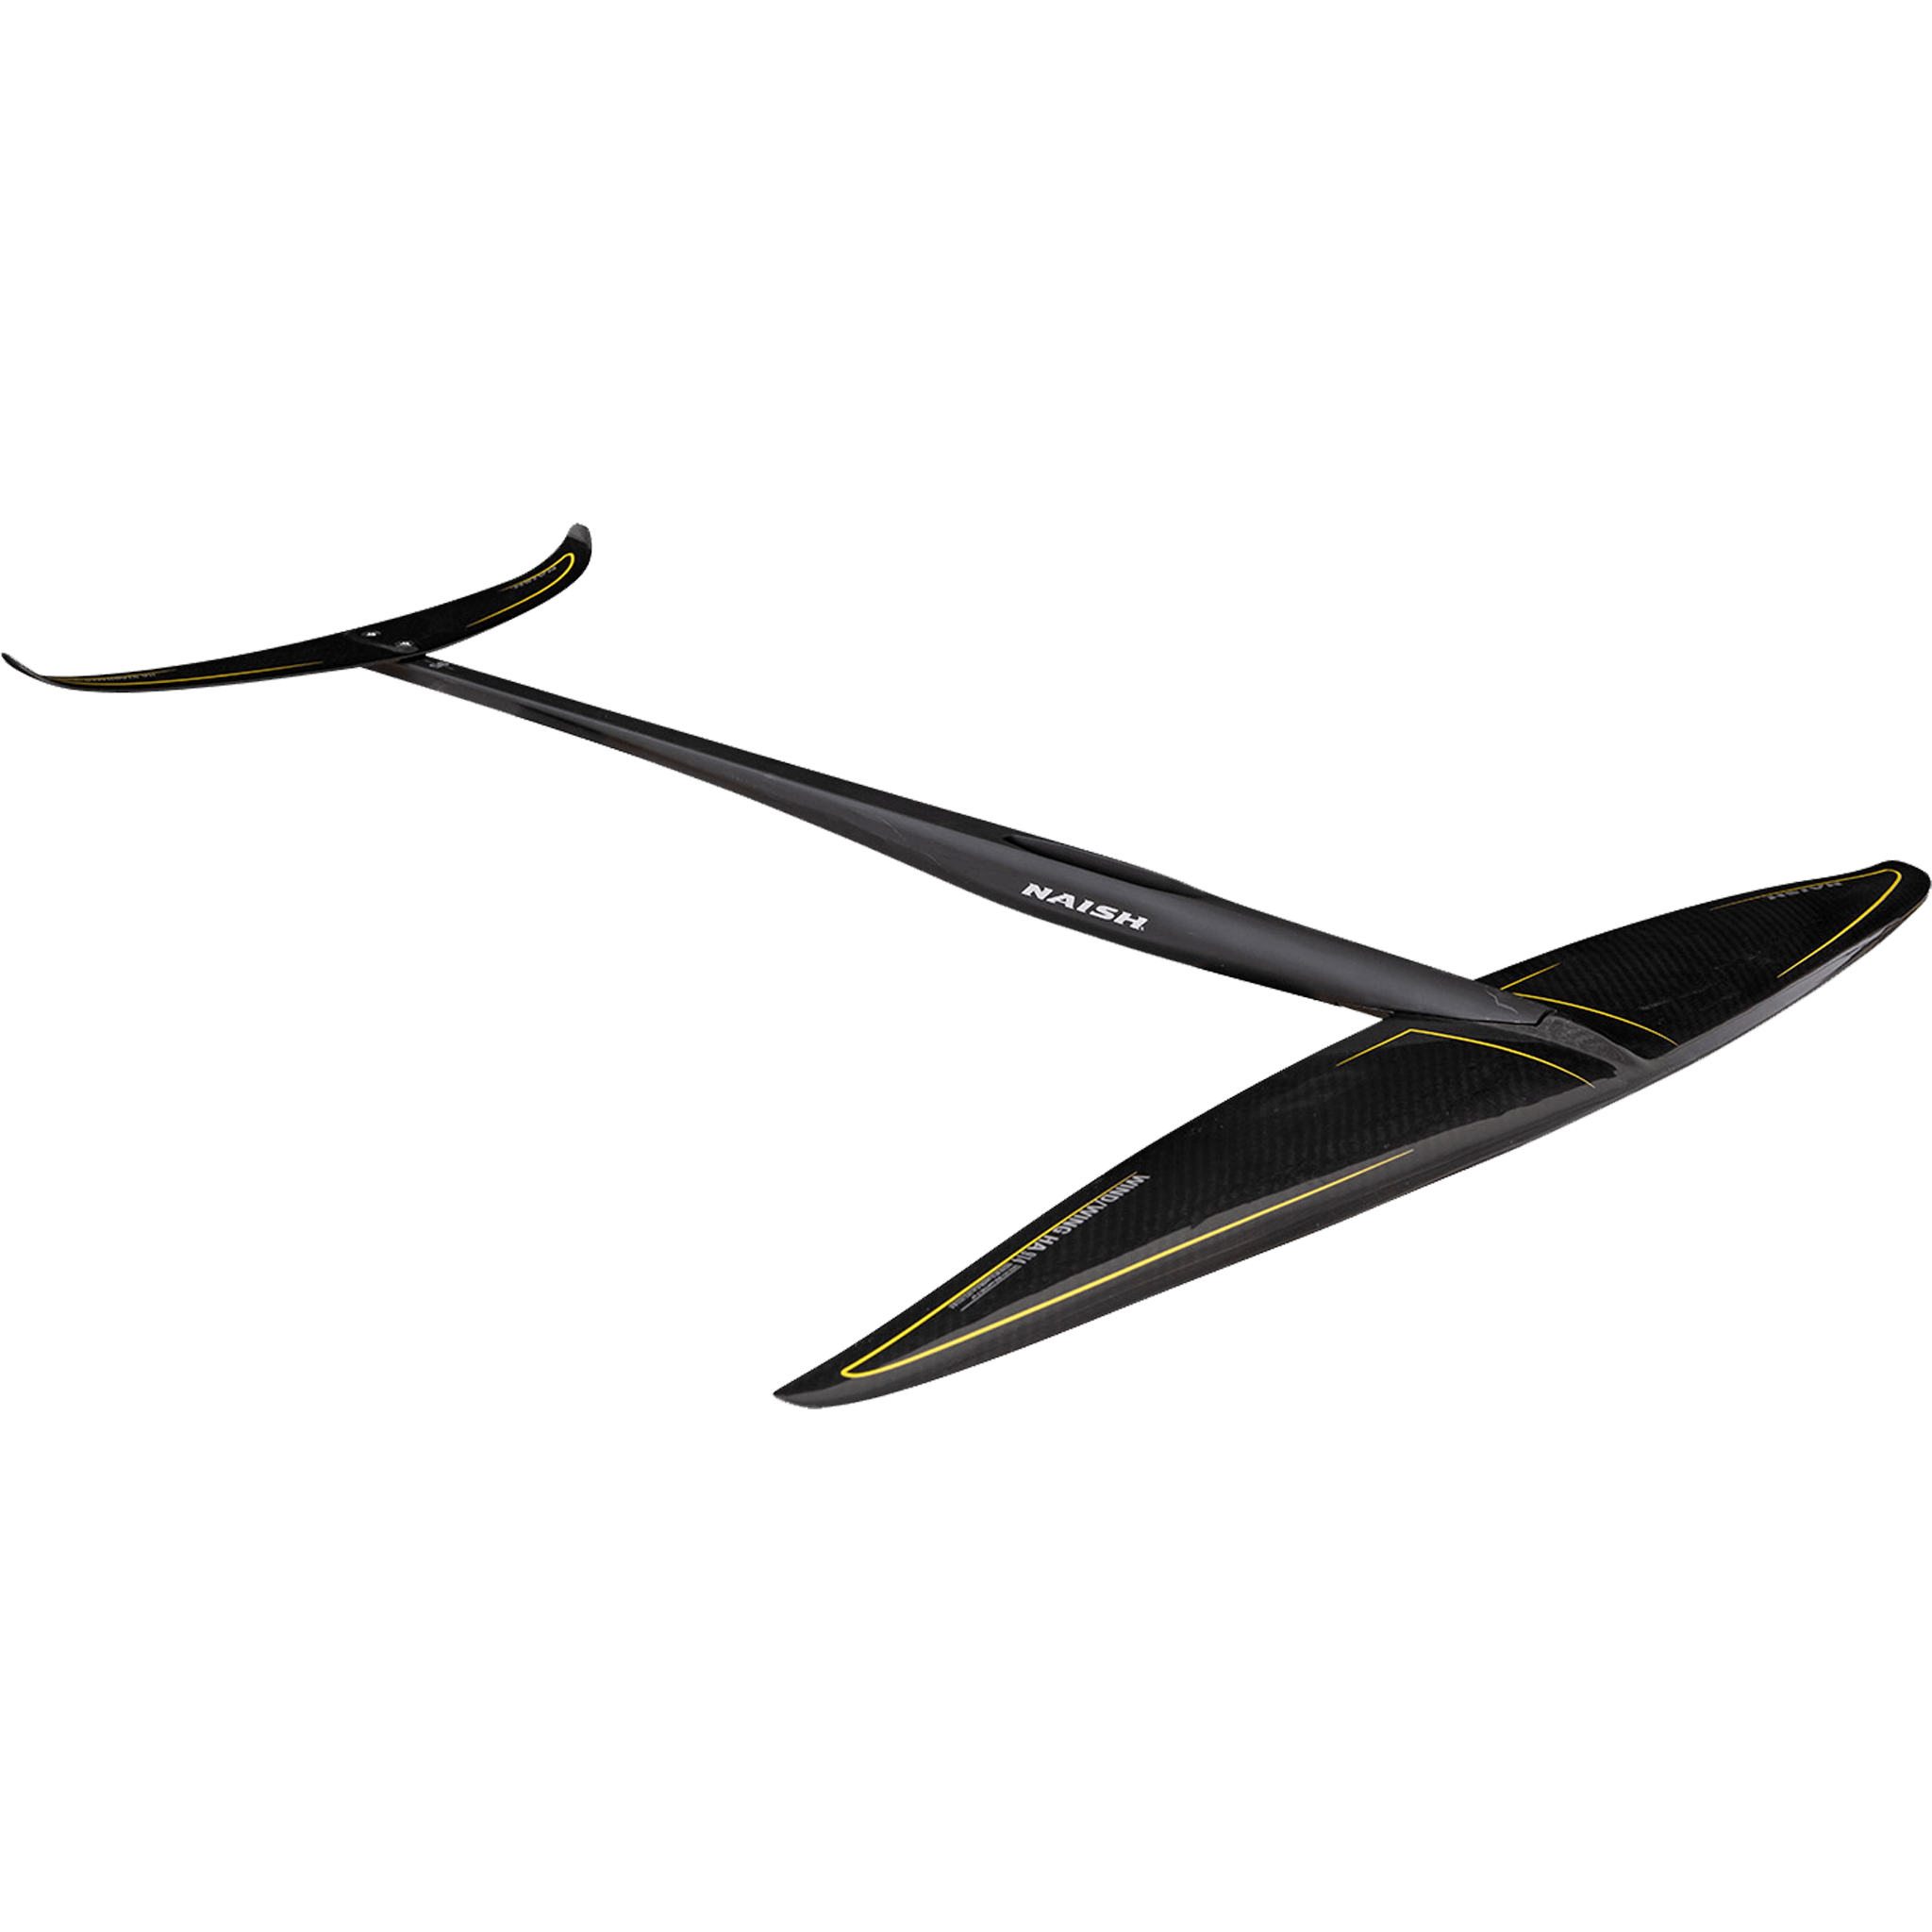 S27 Wind/Wing HA 914 Foil and Wind/Wing HA 914 - Deep Tuttle Fuselage Semi-Complete - Naish.com